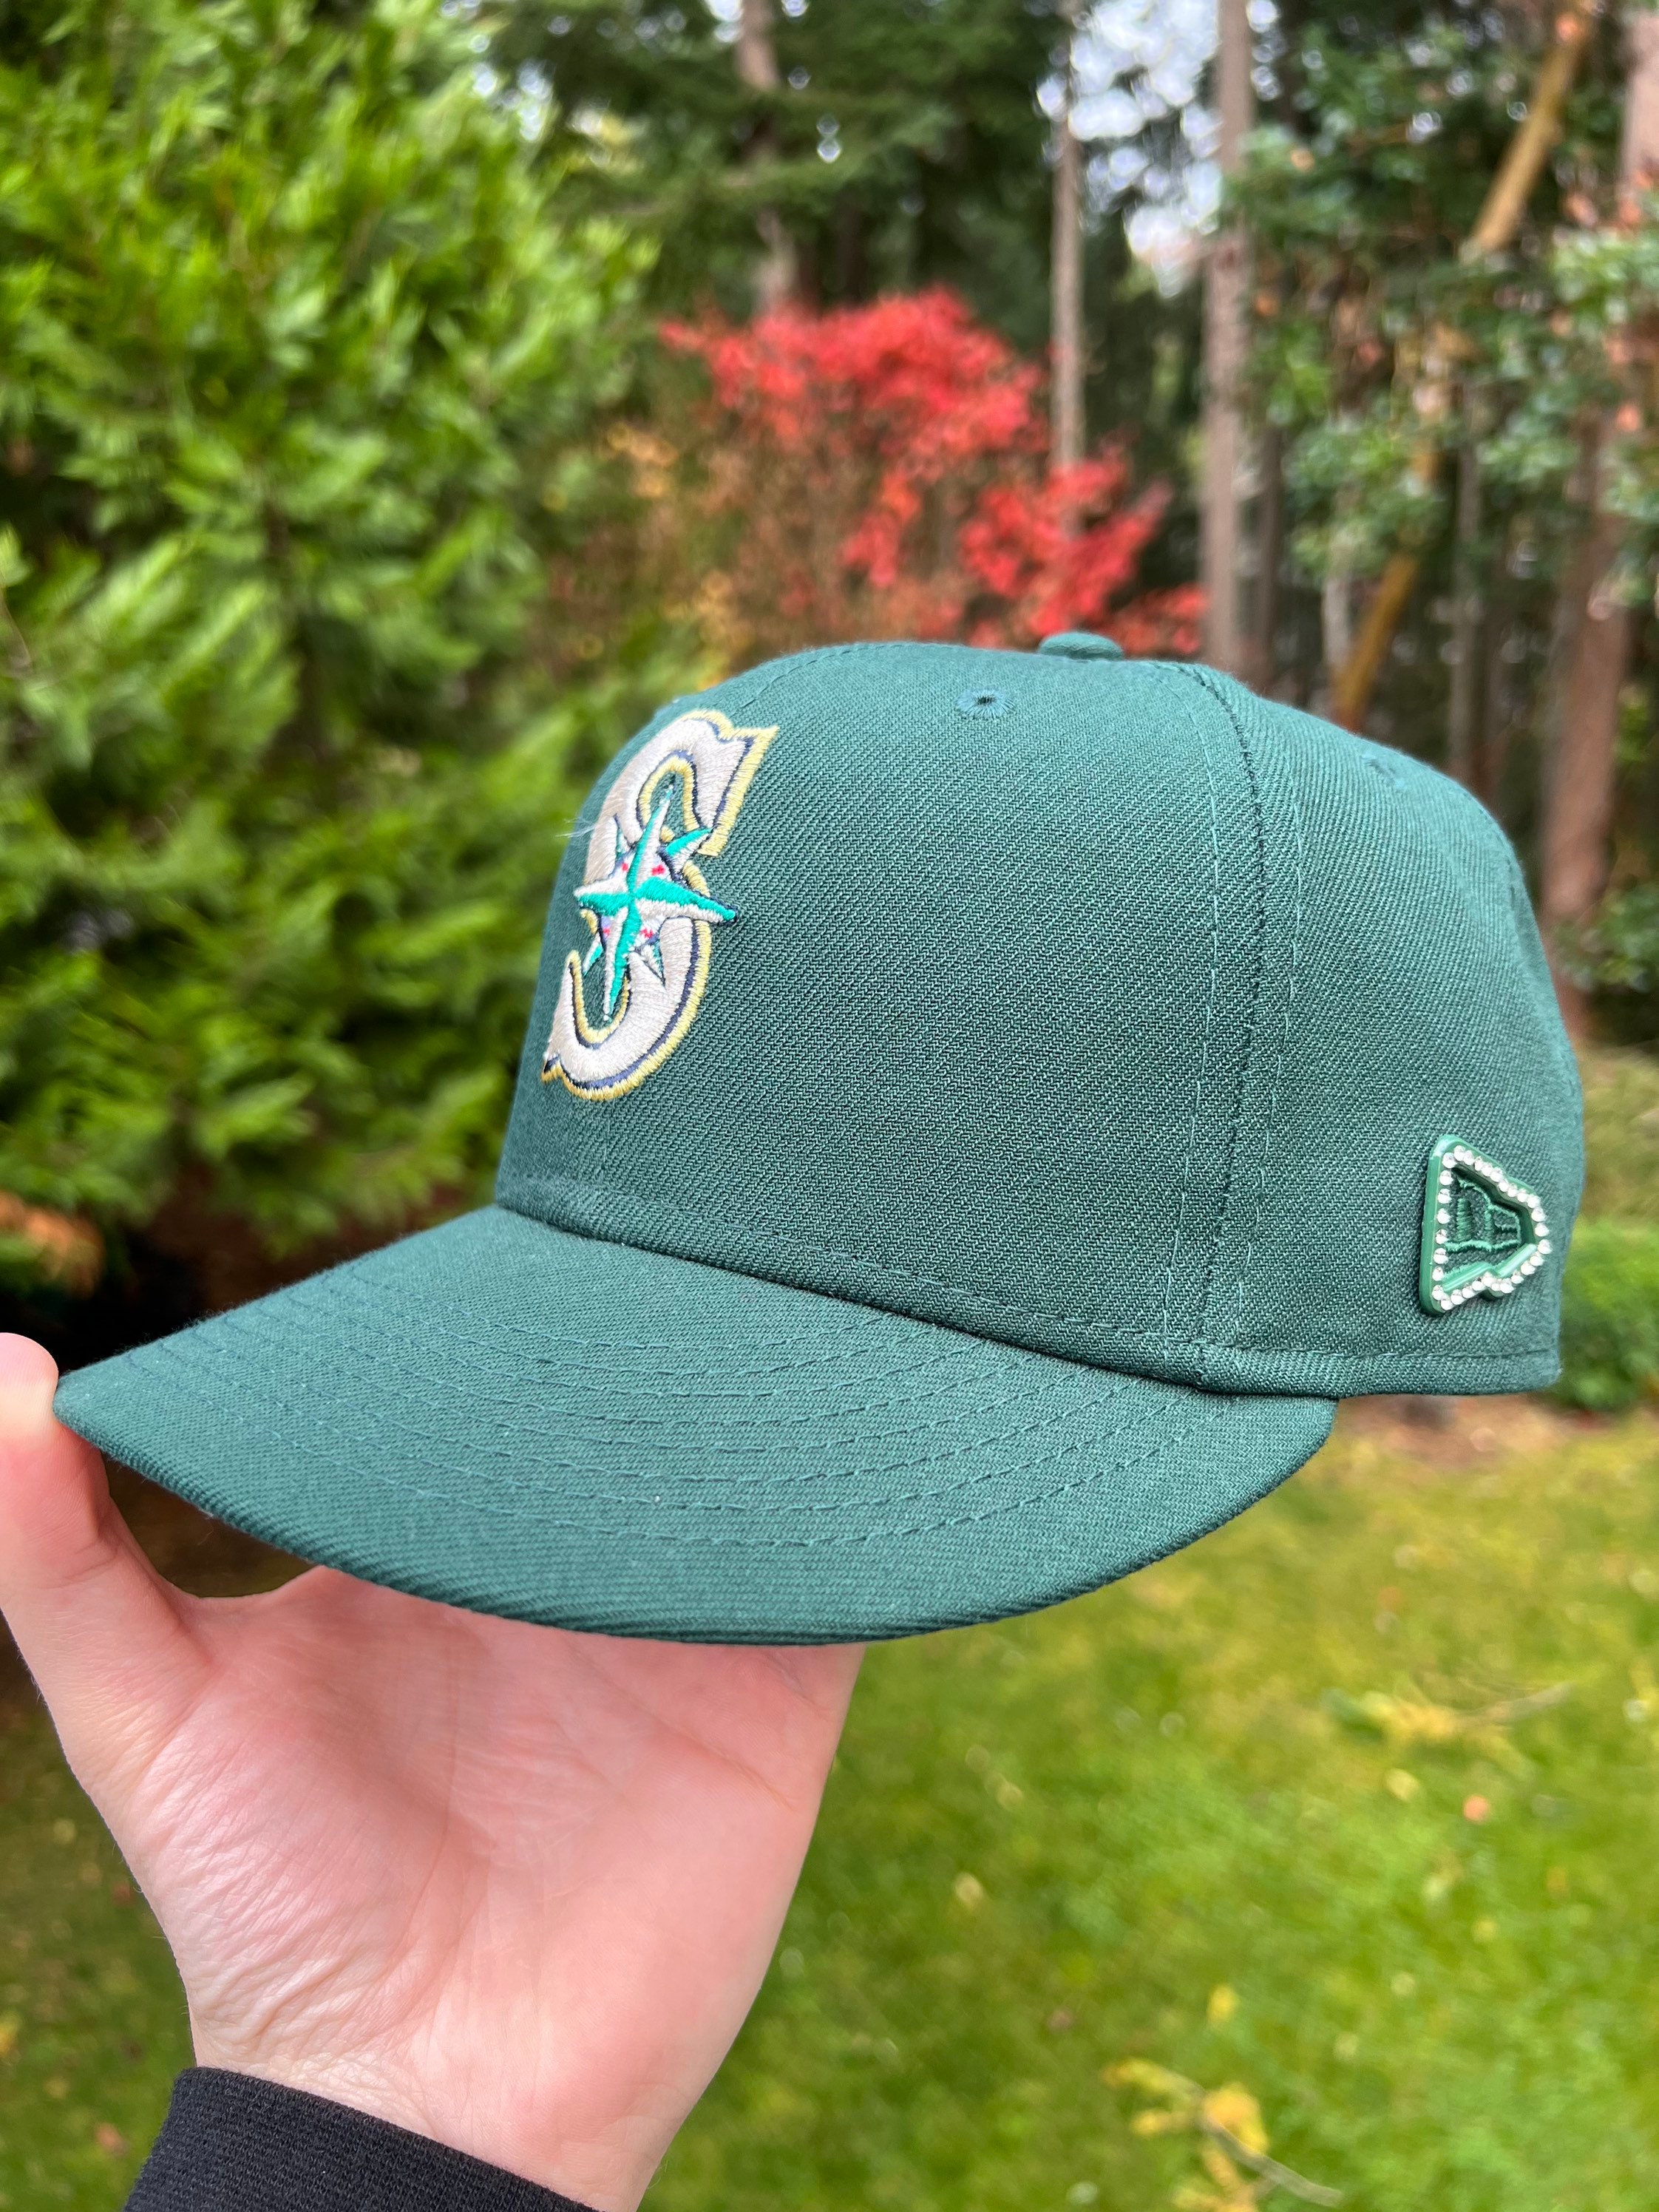 Pin on Newest Hats